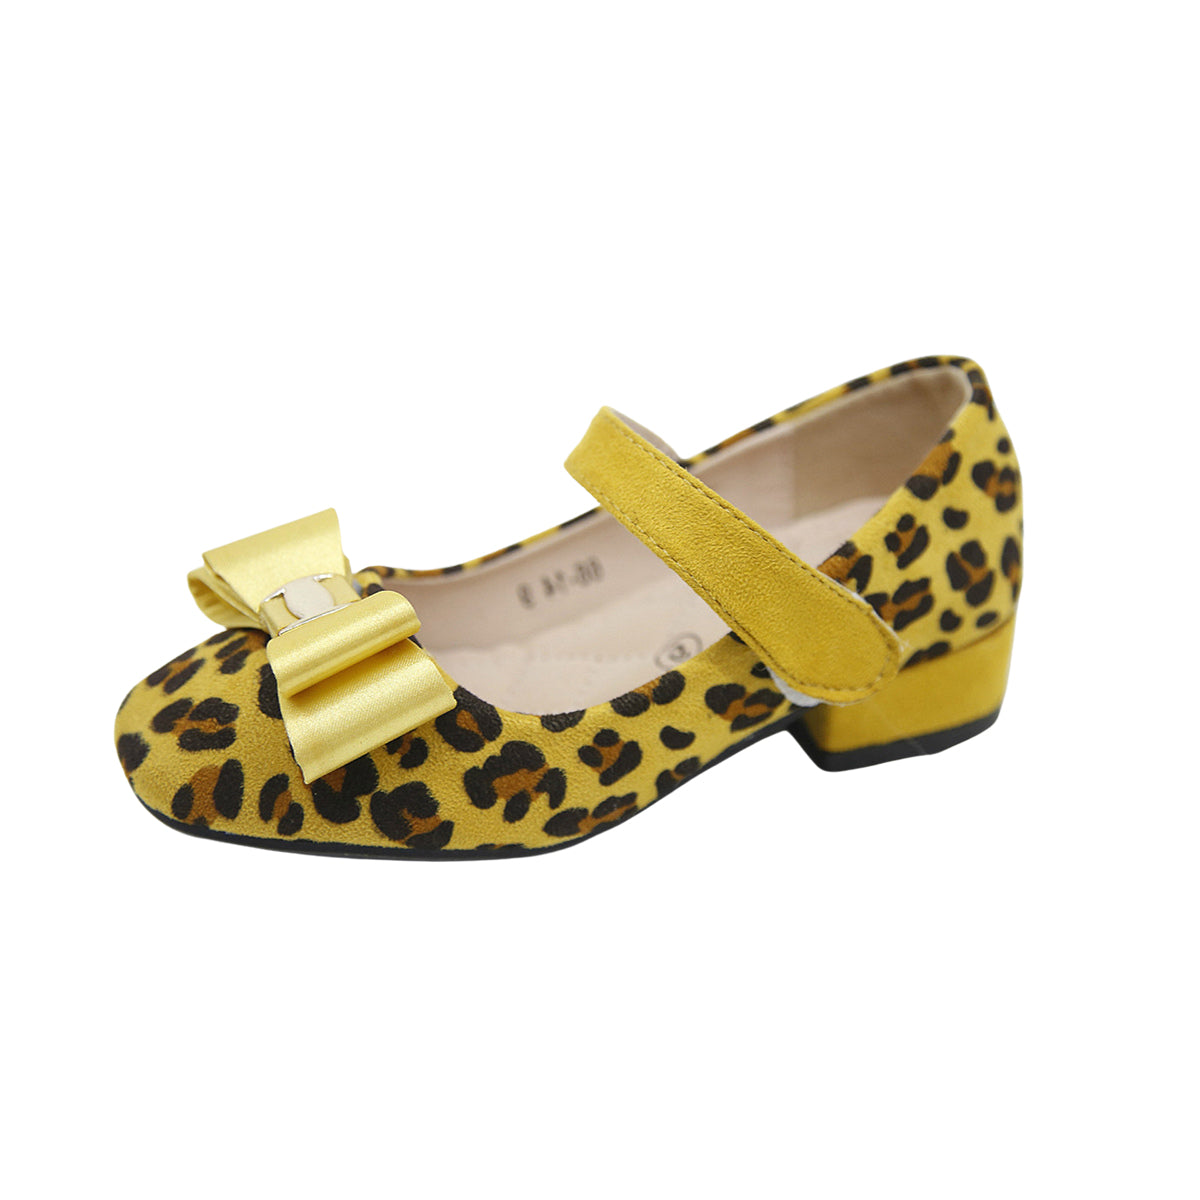 Girls / Children's leopard Print low heel shoes with bow